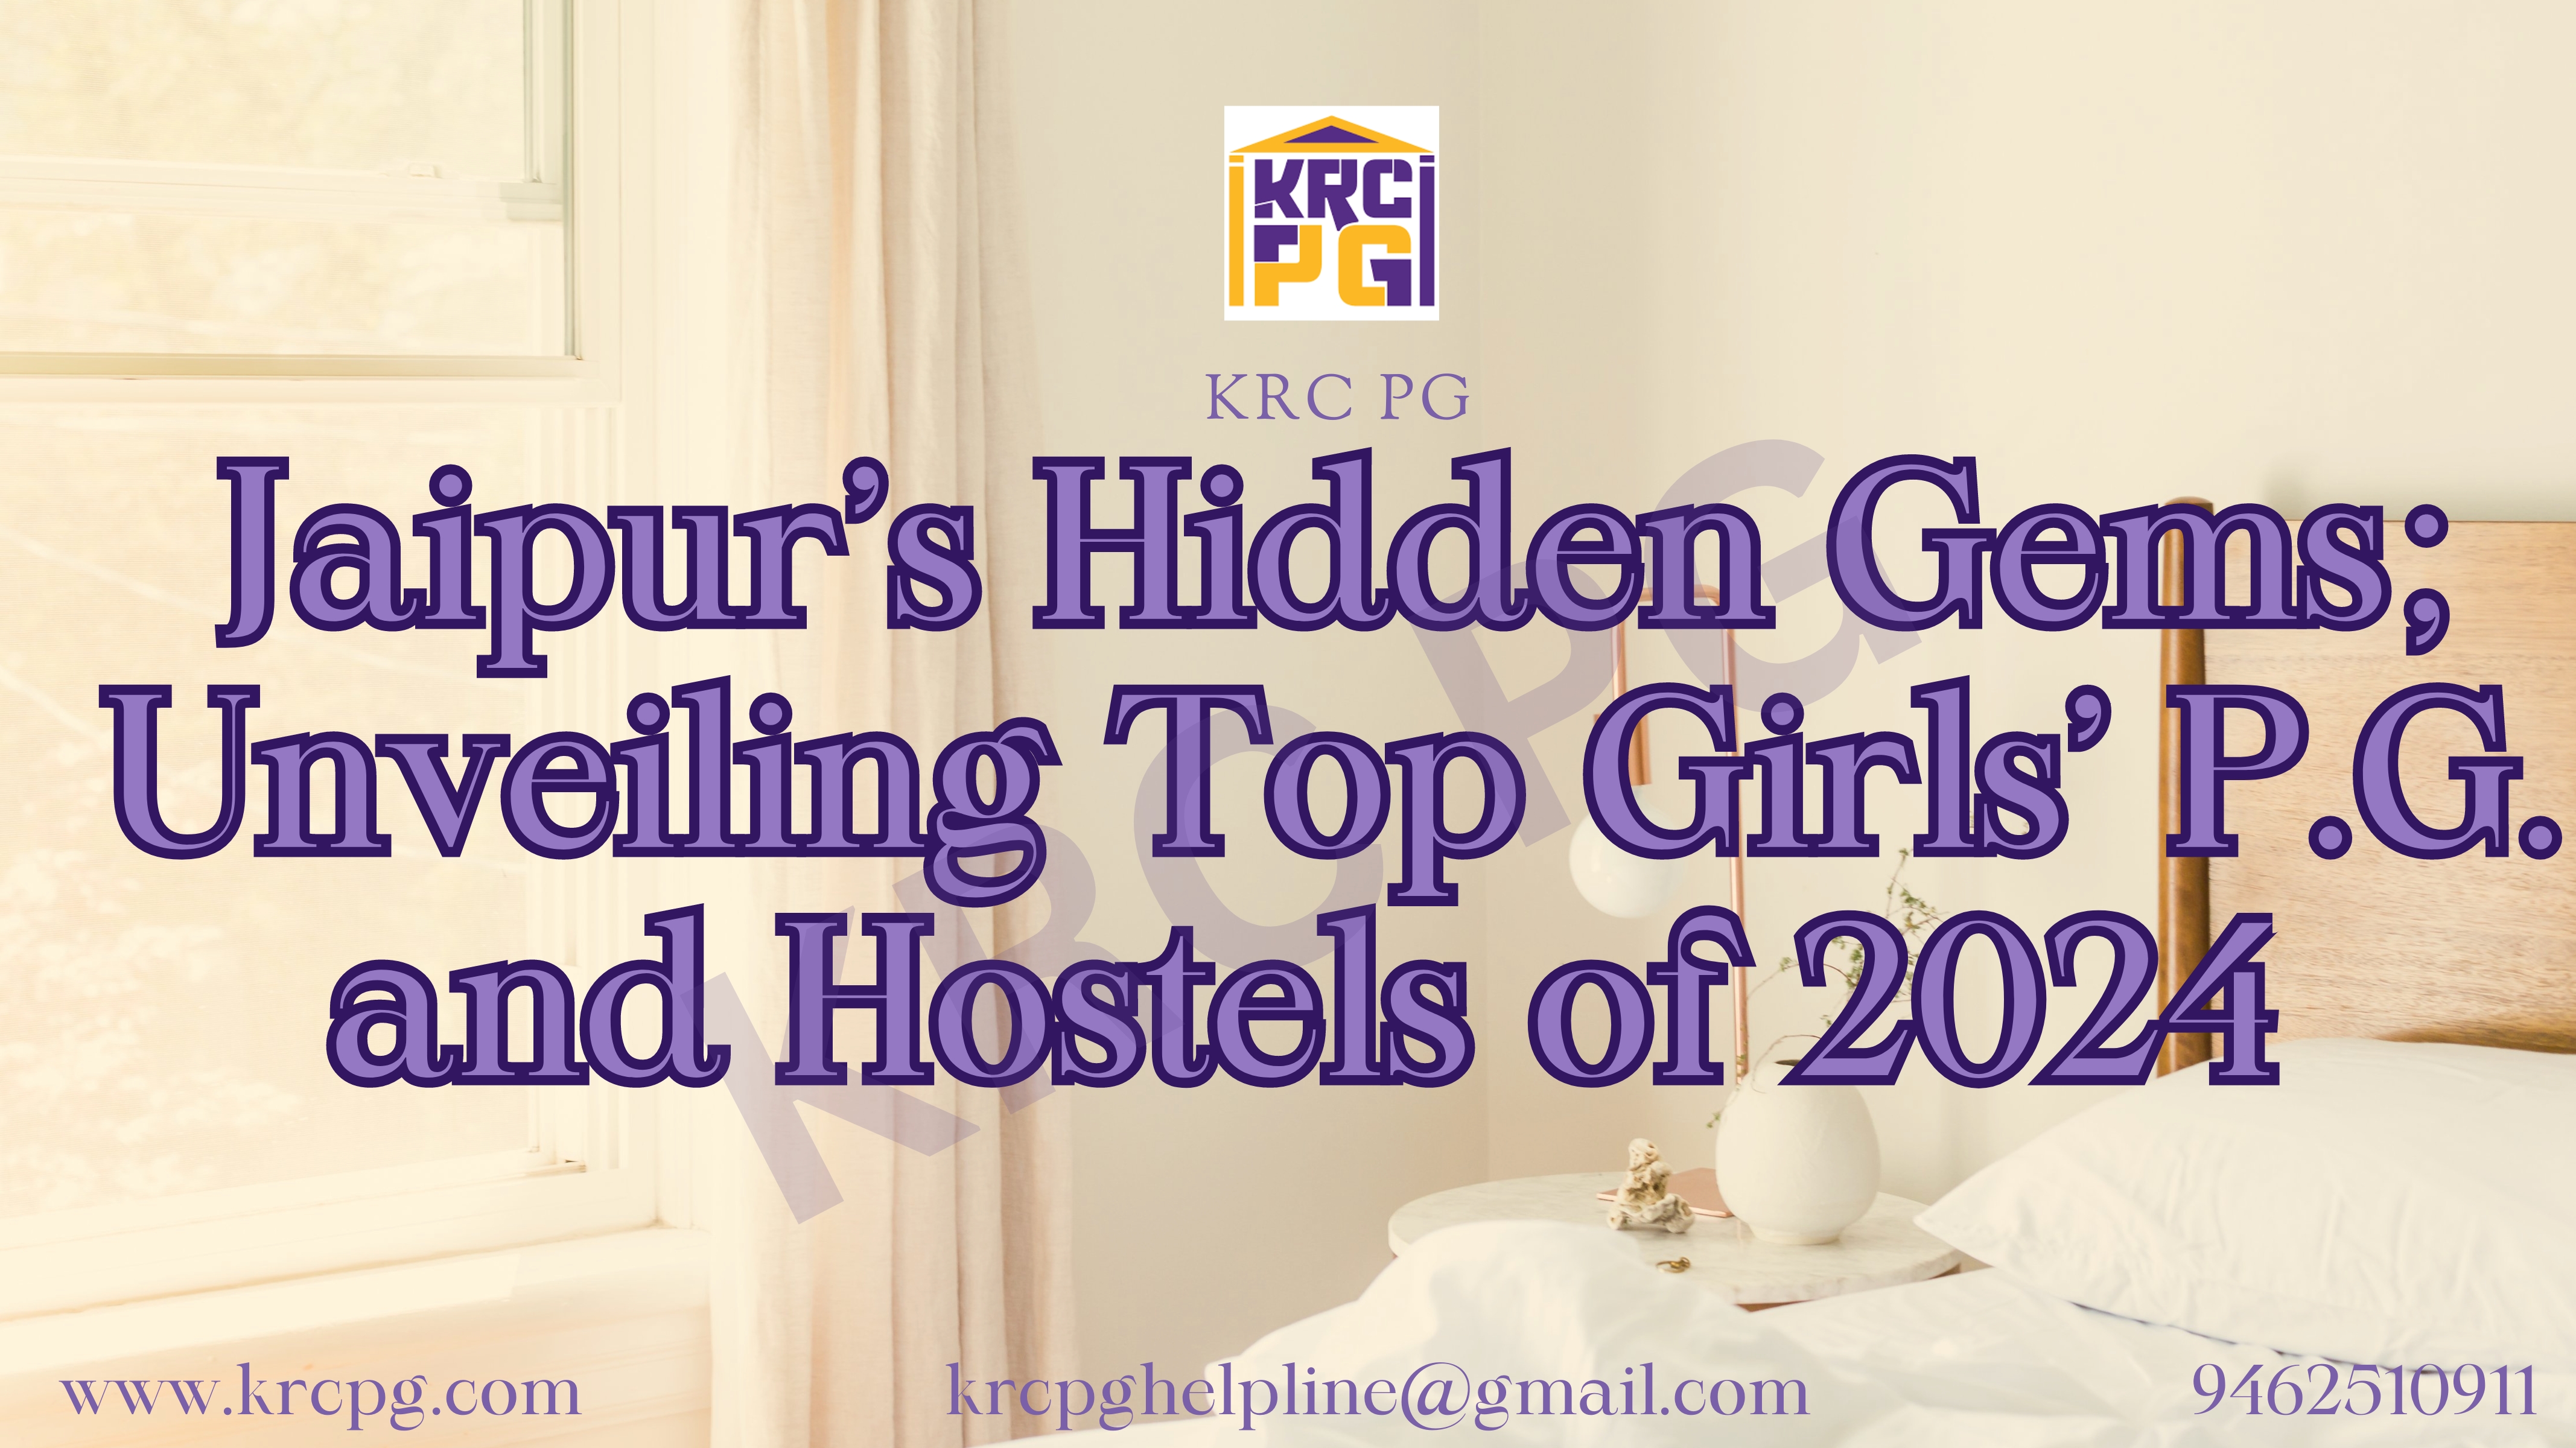 JAIPUR’S HIDDEN GEMS; UNVEILING TOP GIRLS’ P.G. AND HOSTELS IN 2024